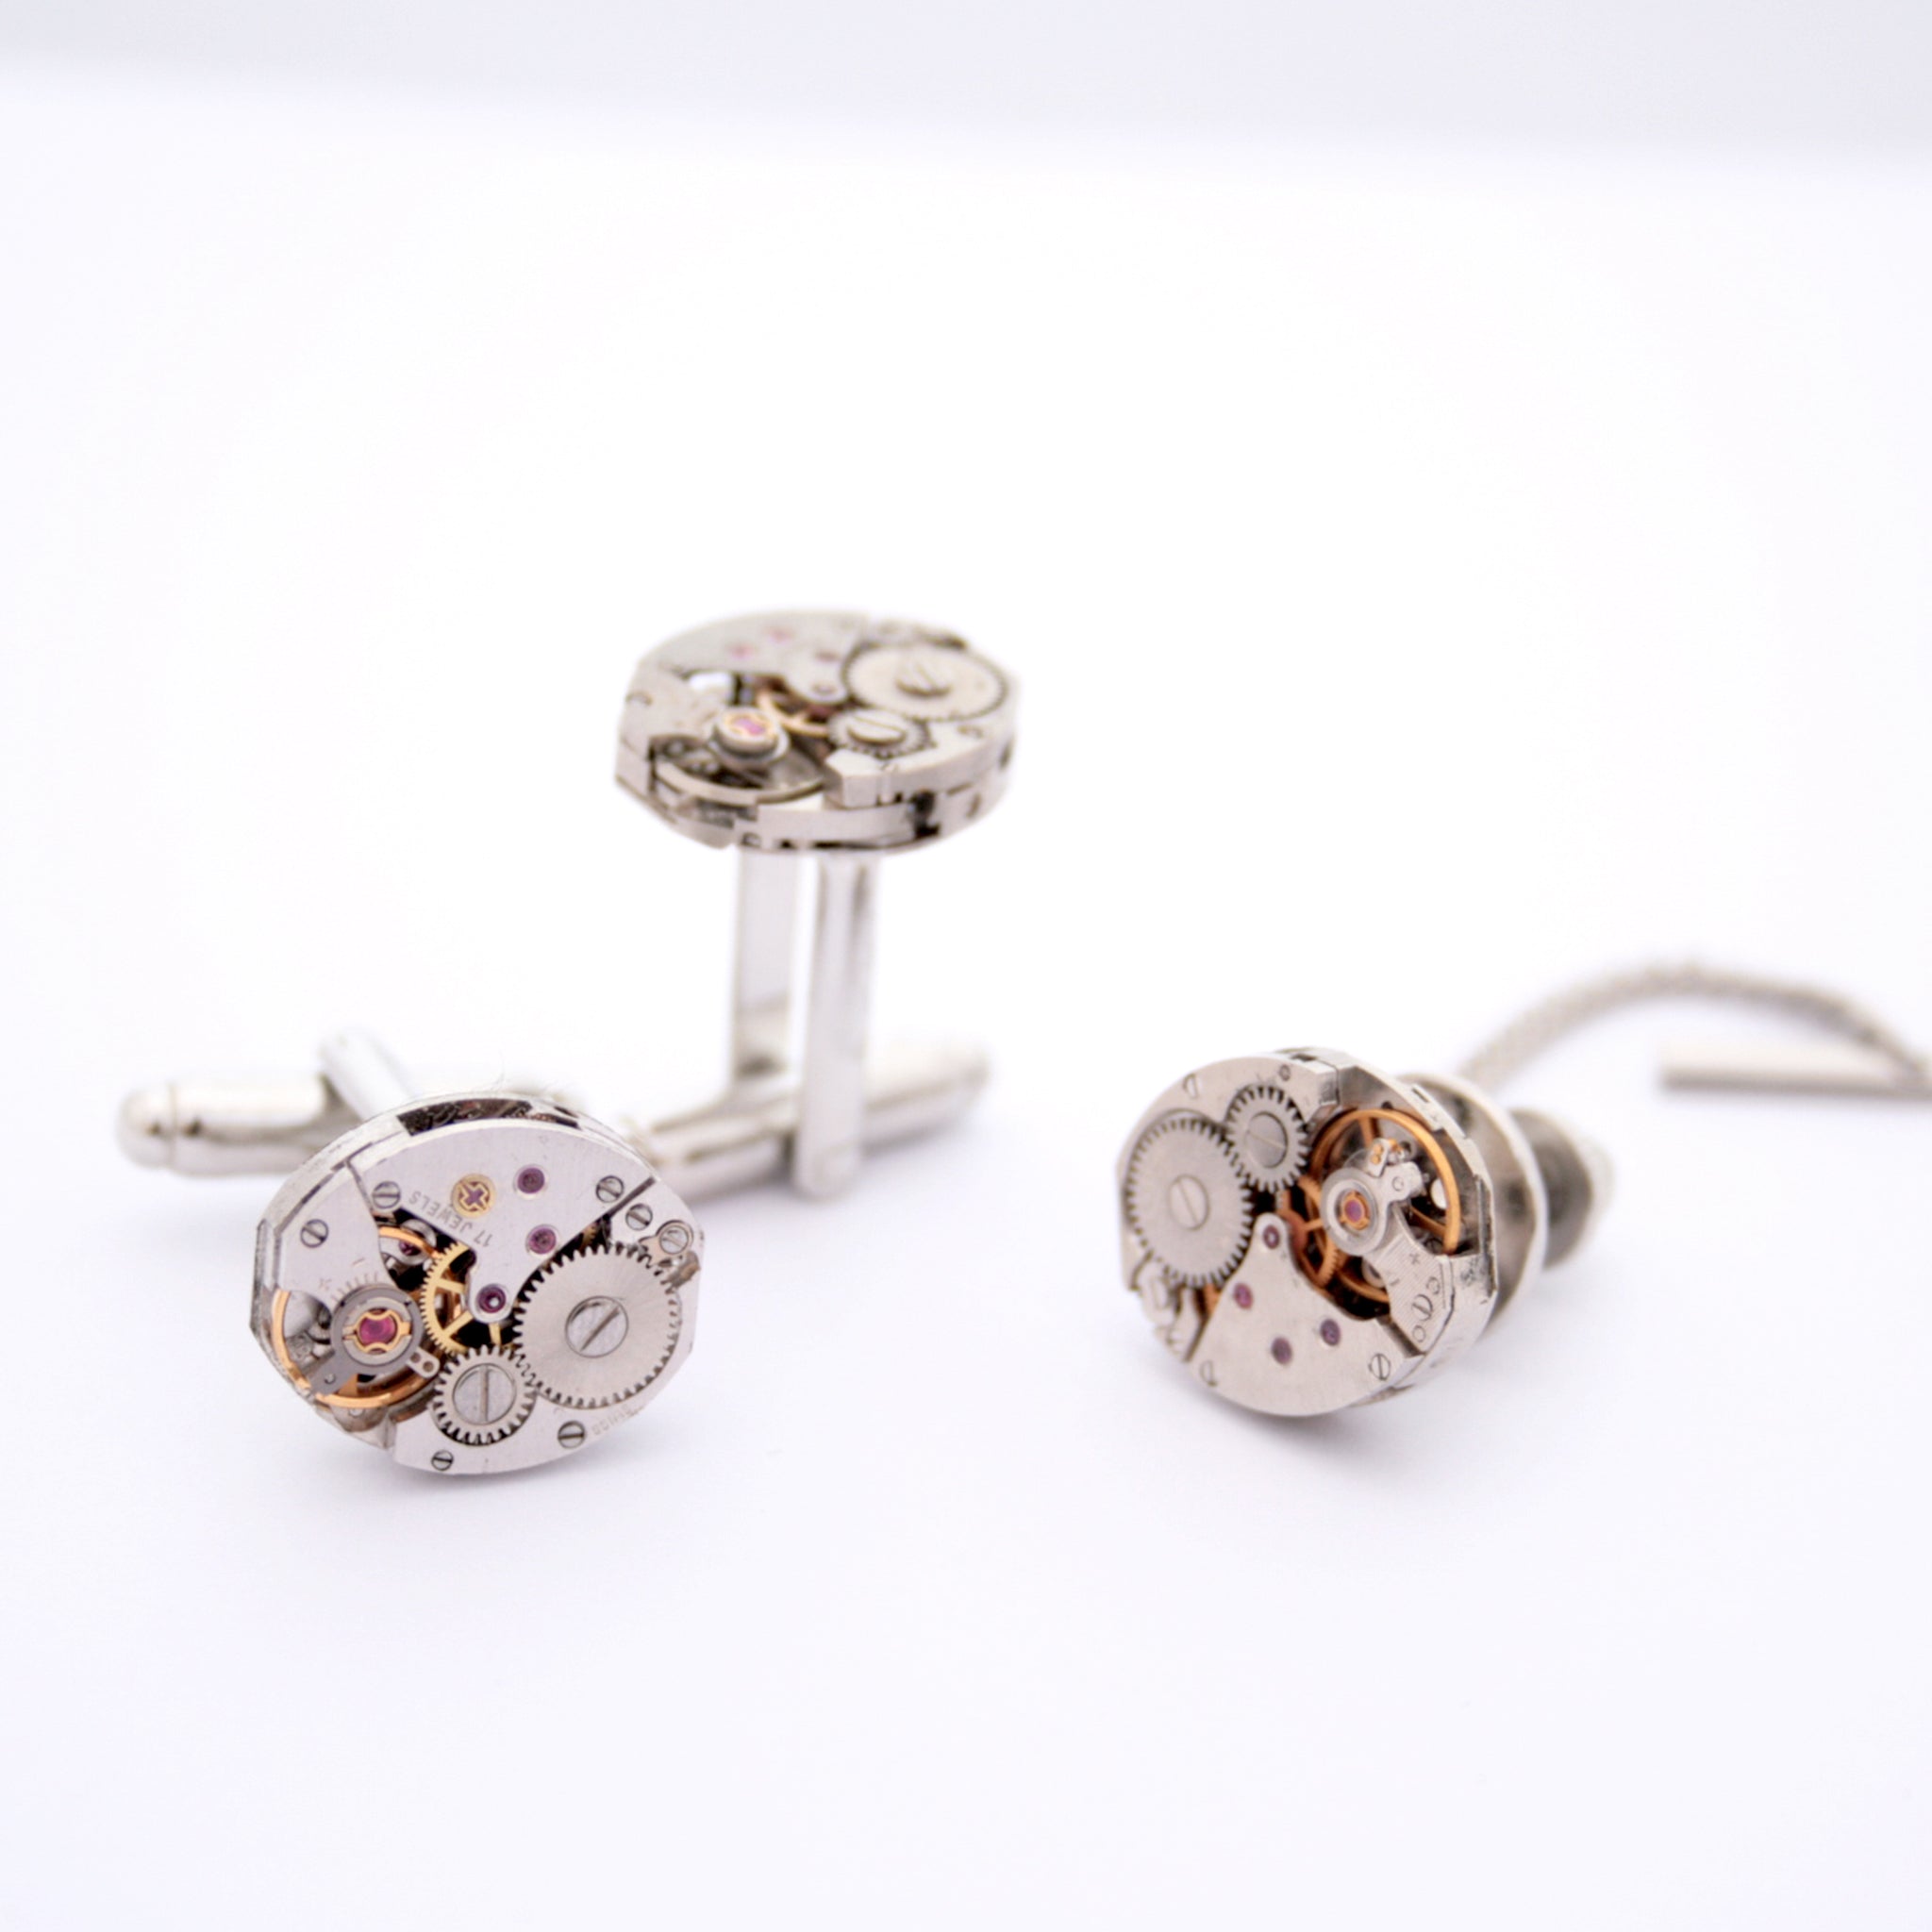 Tie Tack and Cufflinks featuring old clock parts